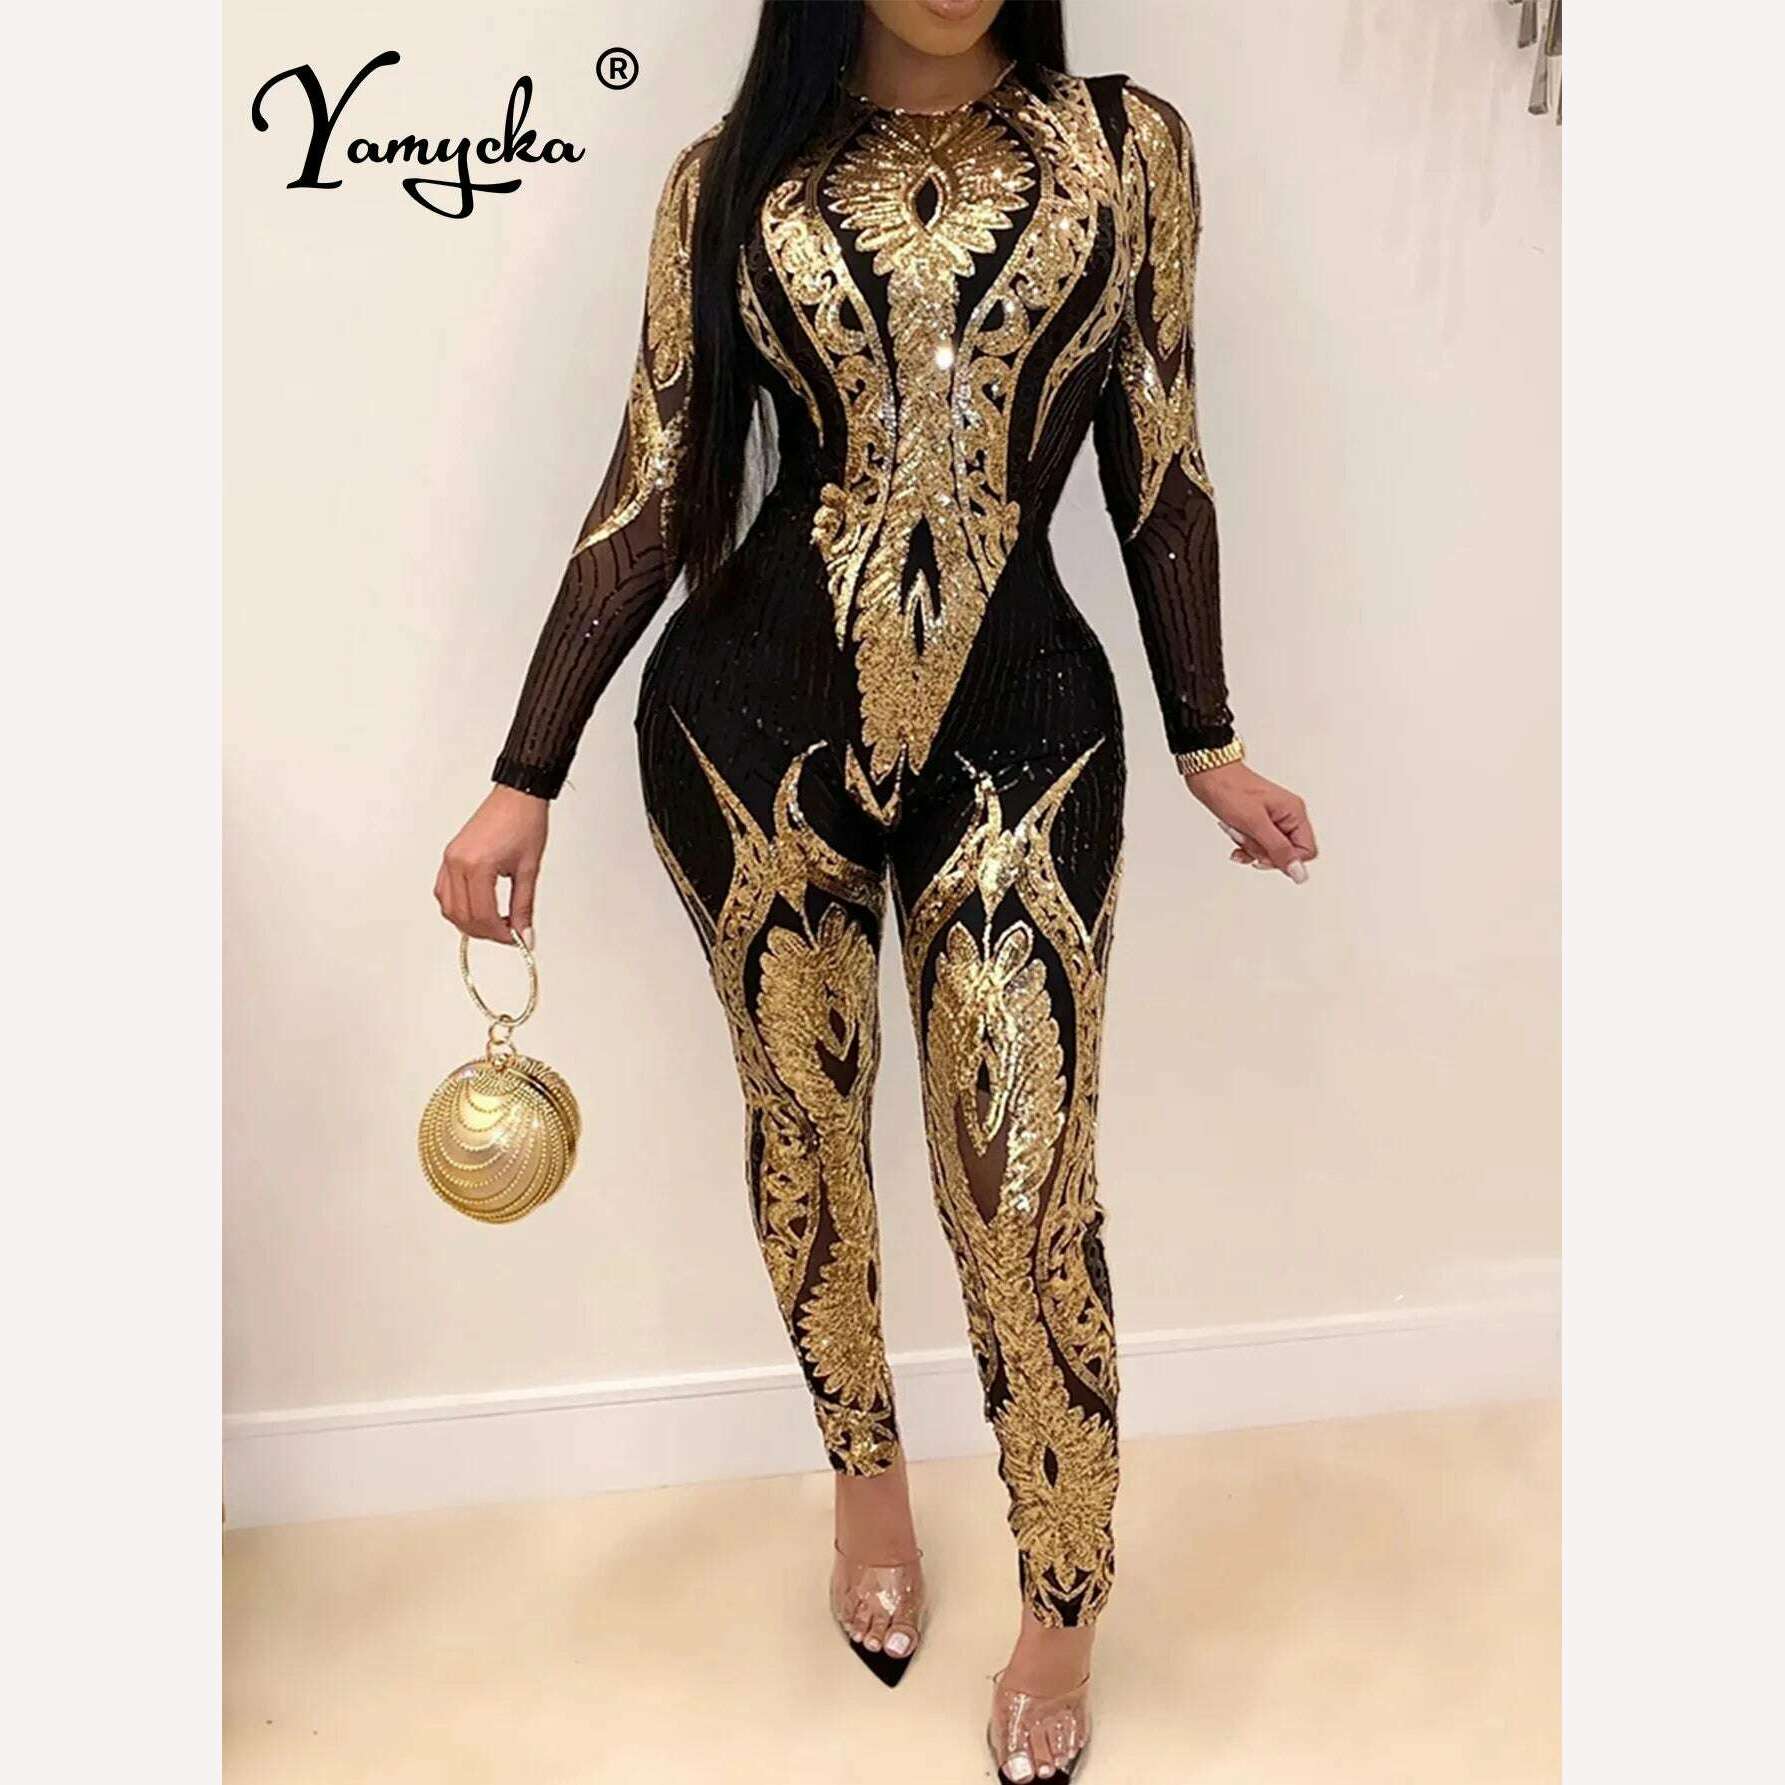 KIMLUD, Sexy Long sleeve Sequin bodycon jumpsuit women body bodysuit one piece birthday party nightclub outfits womens jumpsuits overall, KIMLUD Women's Clothes